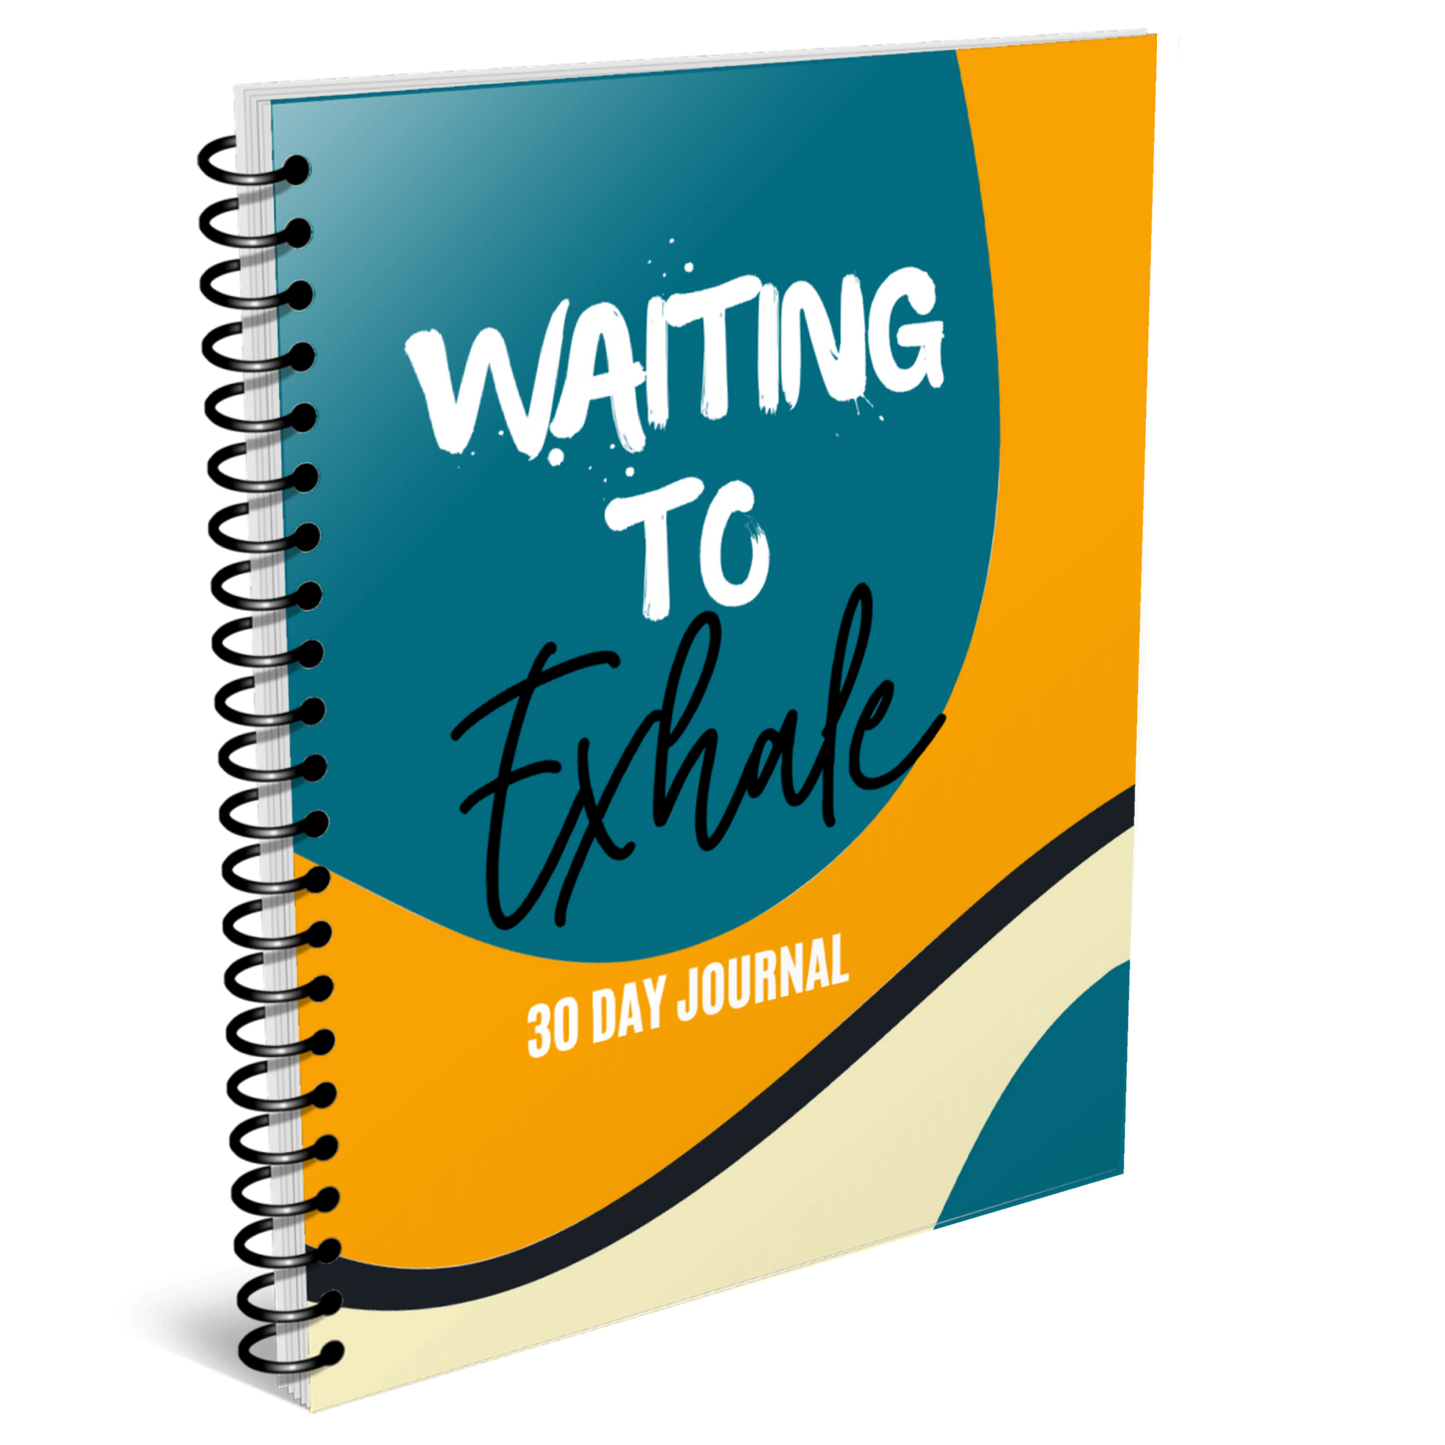 Waiting To Exhale 30 Day Journal for KDP Amazon & The Book Patch